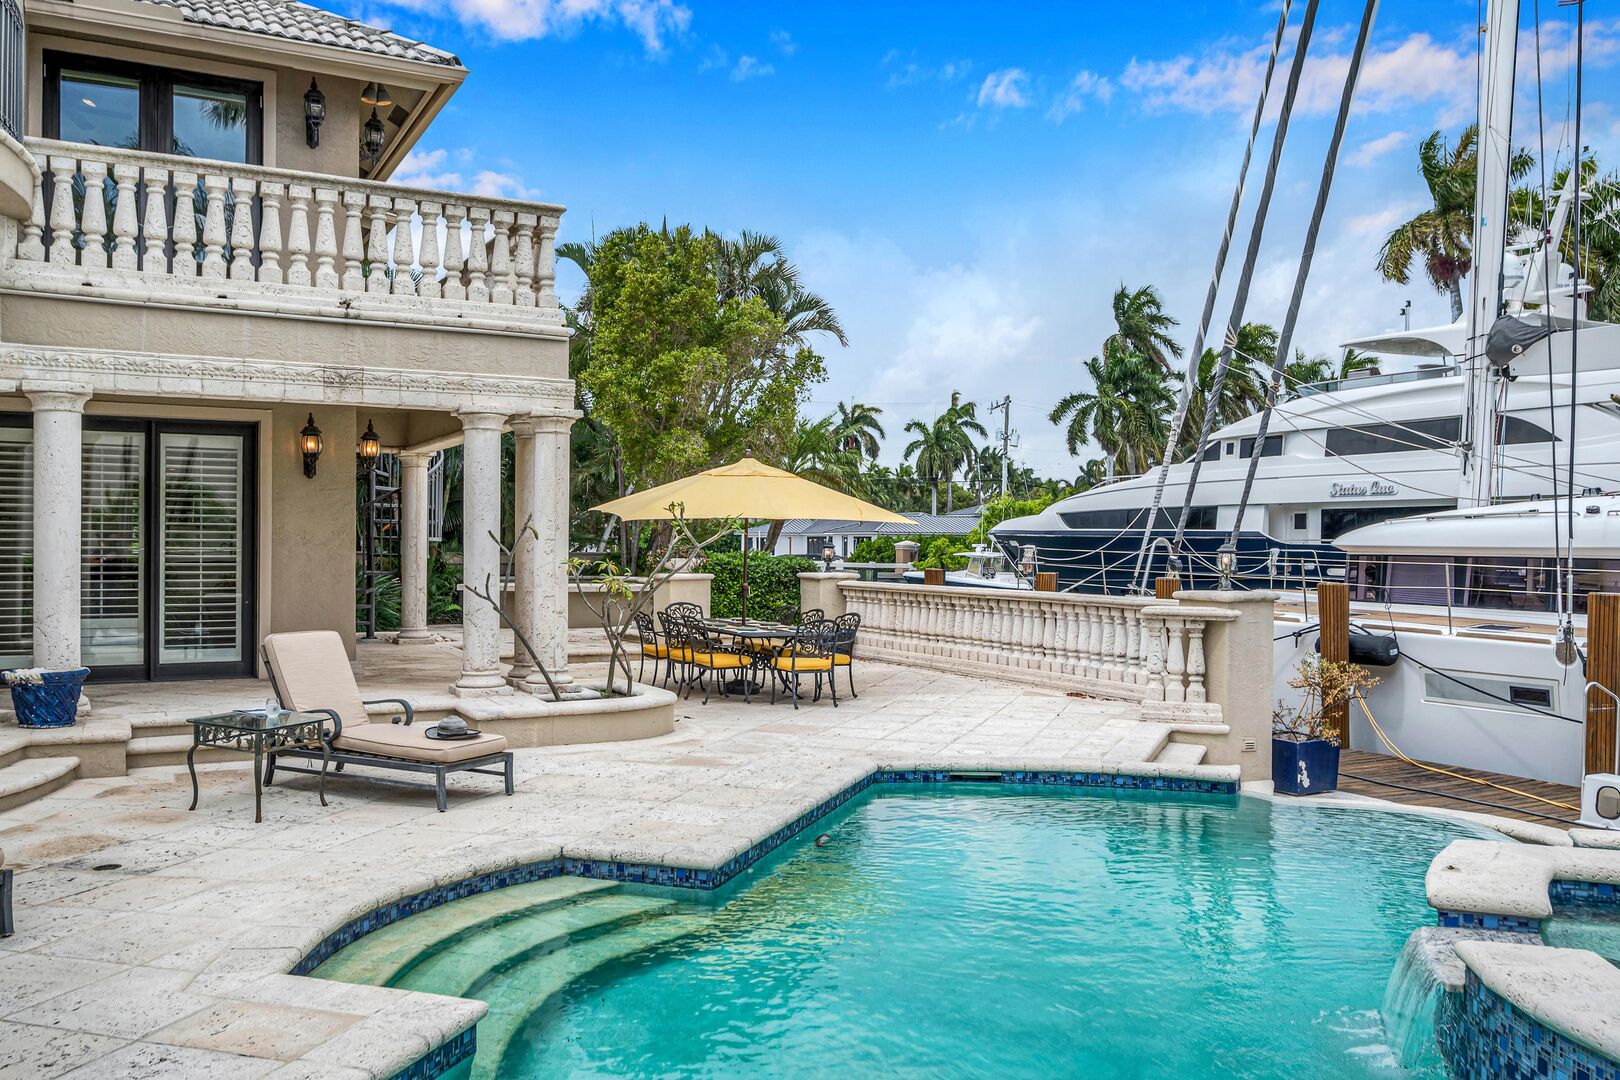 The heated swimming pool with loungers and waterfront views.